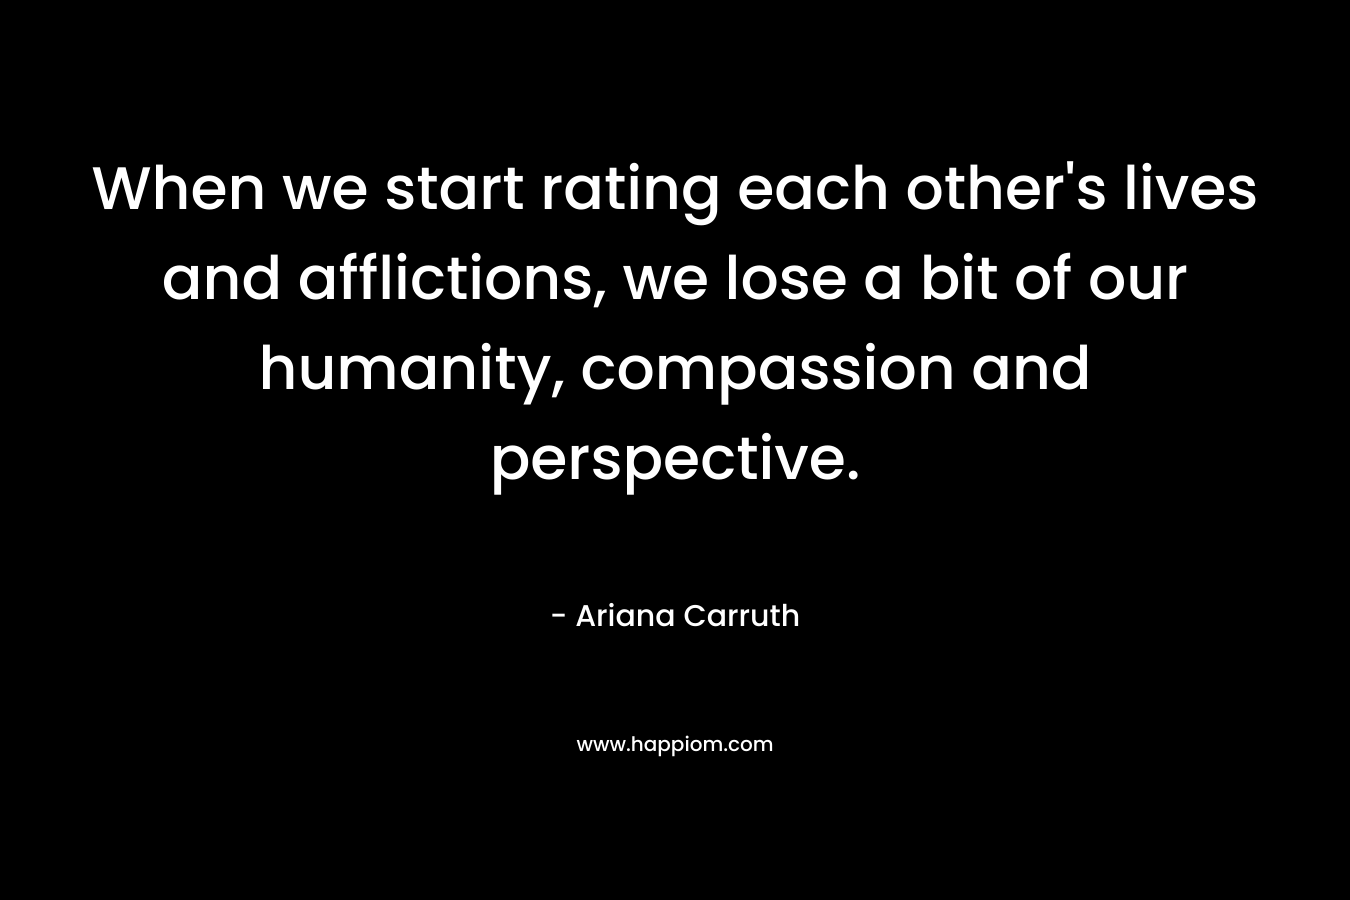 When we start rating each other’s lives and afflictions, we lose a bit of our humanity, compassion and perspective. – Ariana Carruth